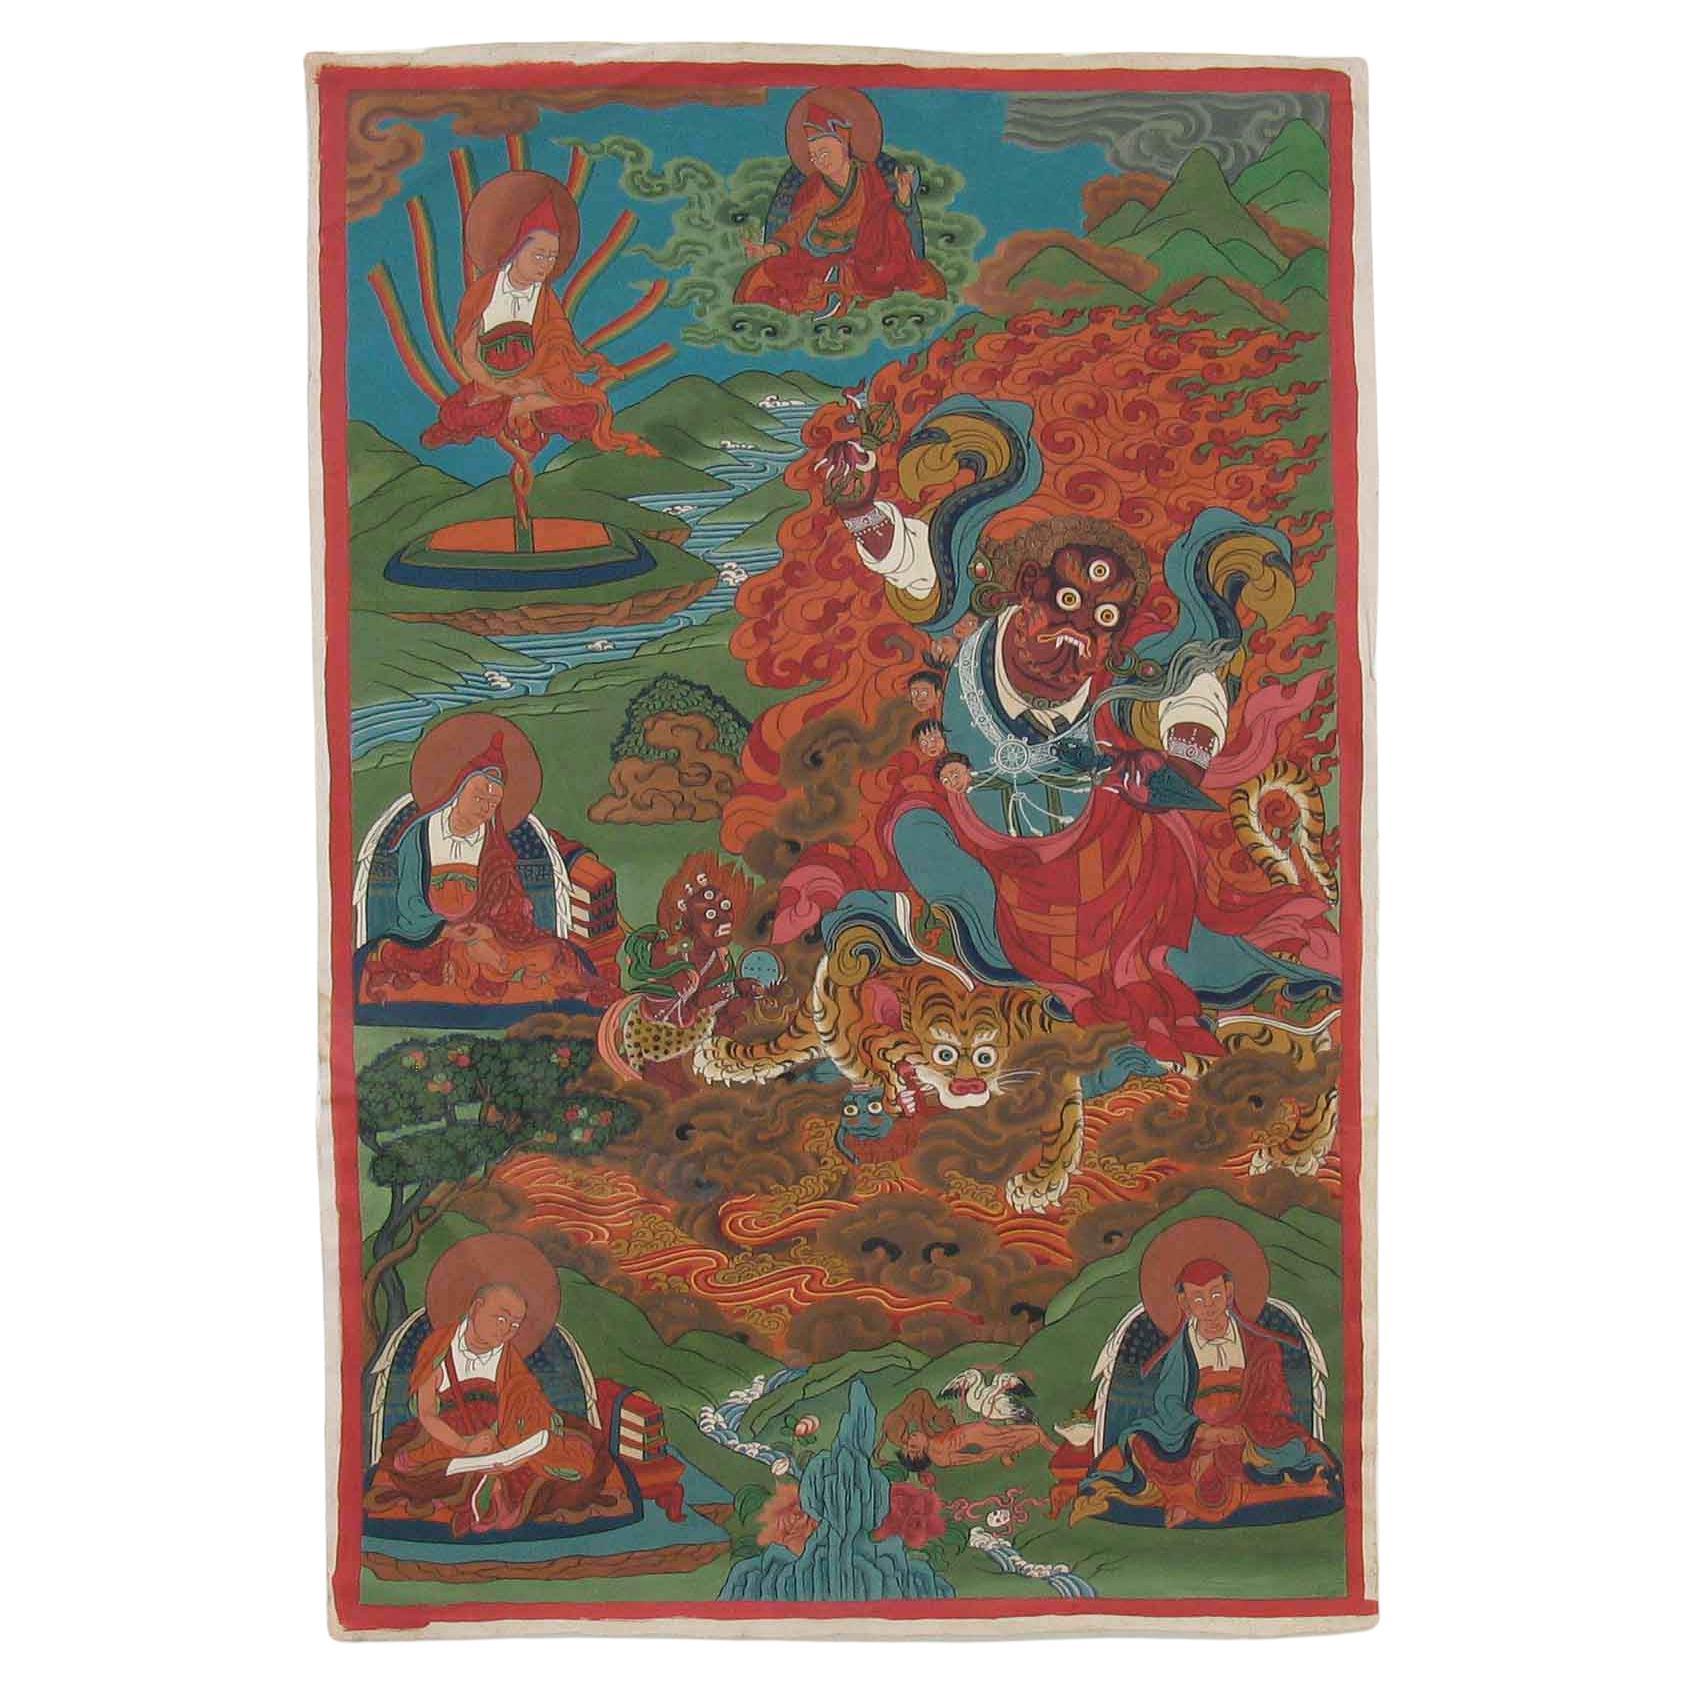 What is a traditional Tibetan Buddhist painting called?